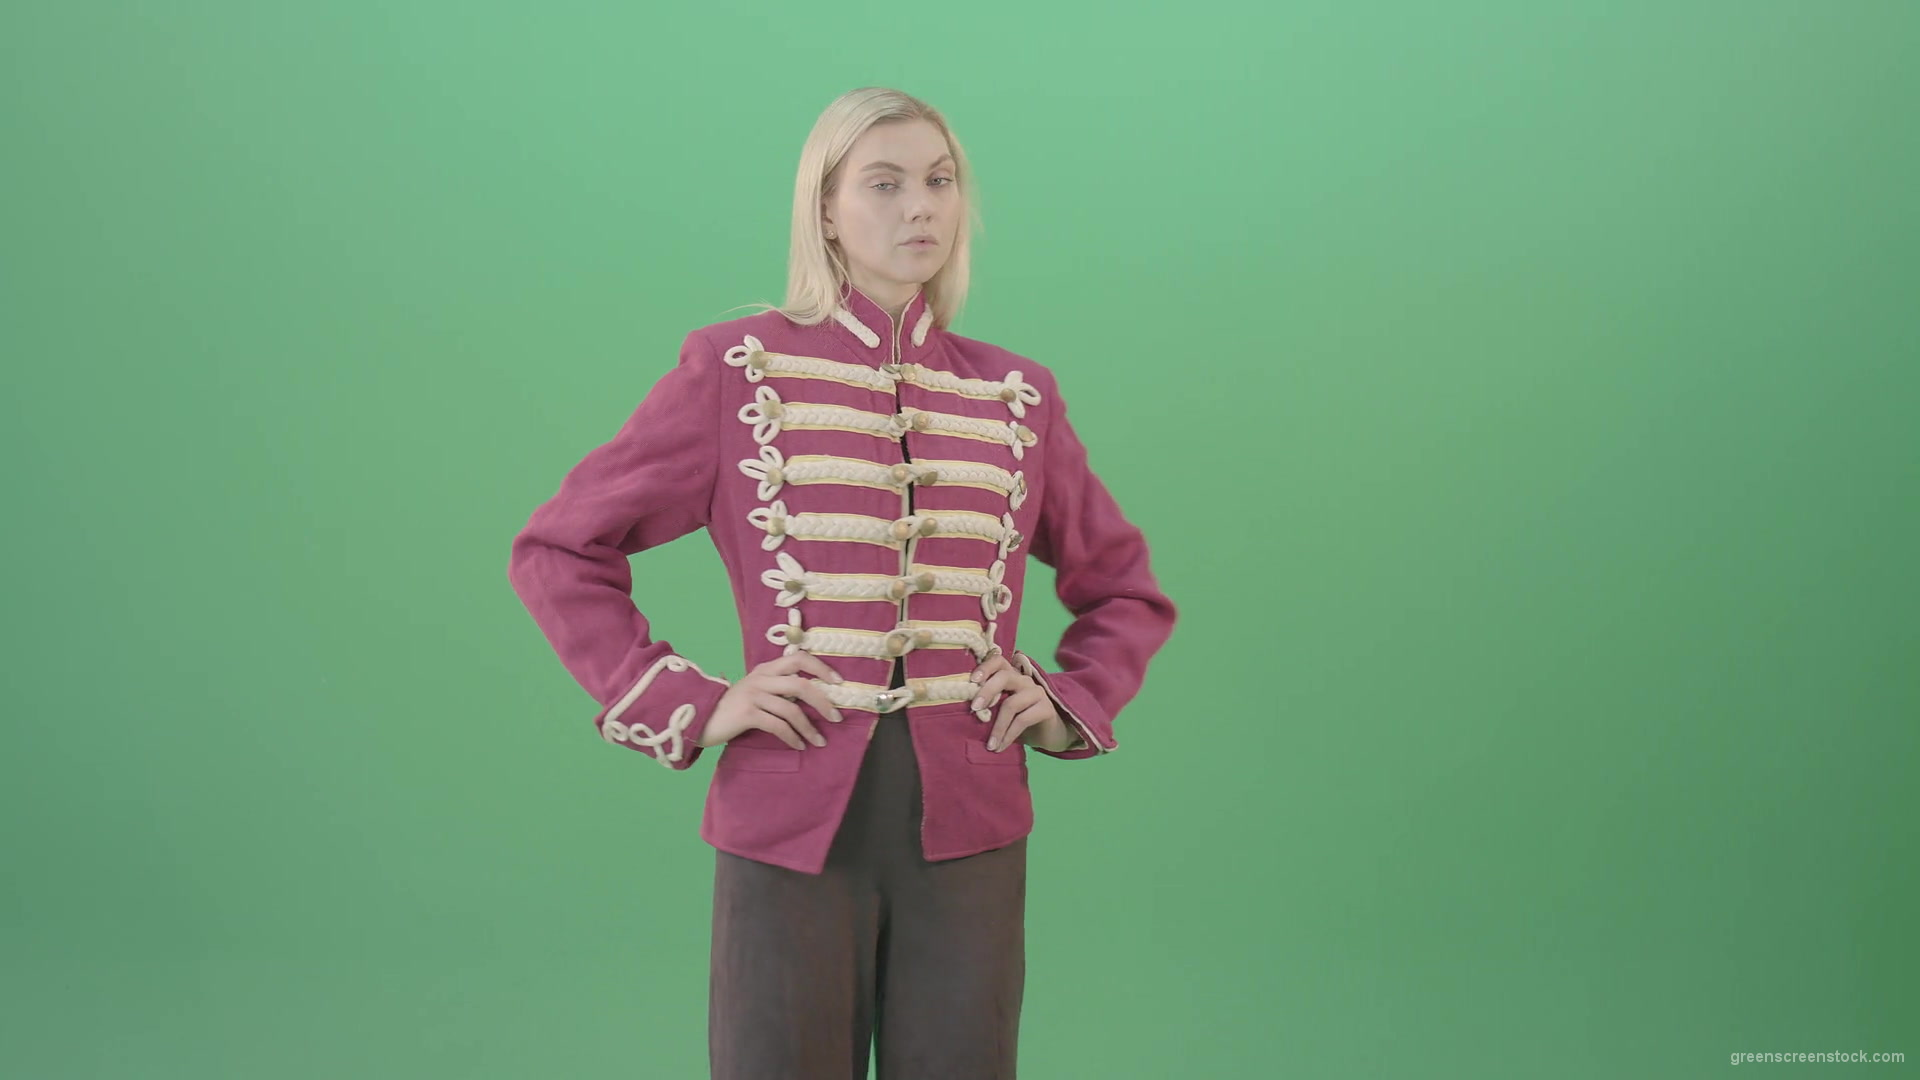 Blonde-Girl-in-Imperial-Royal-uniform-posing-and-shows-photomodel-gestures-isolated-on-Green-Screen-4K-Video-Footage-1920_008 Green Screen Stock